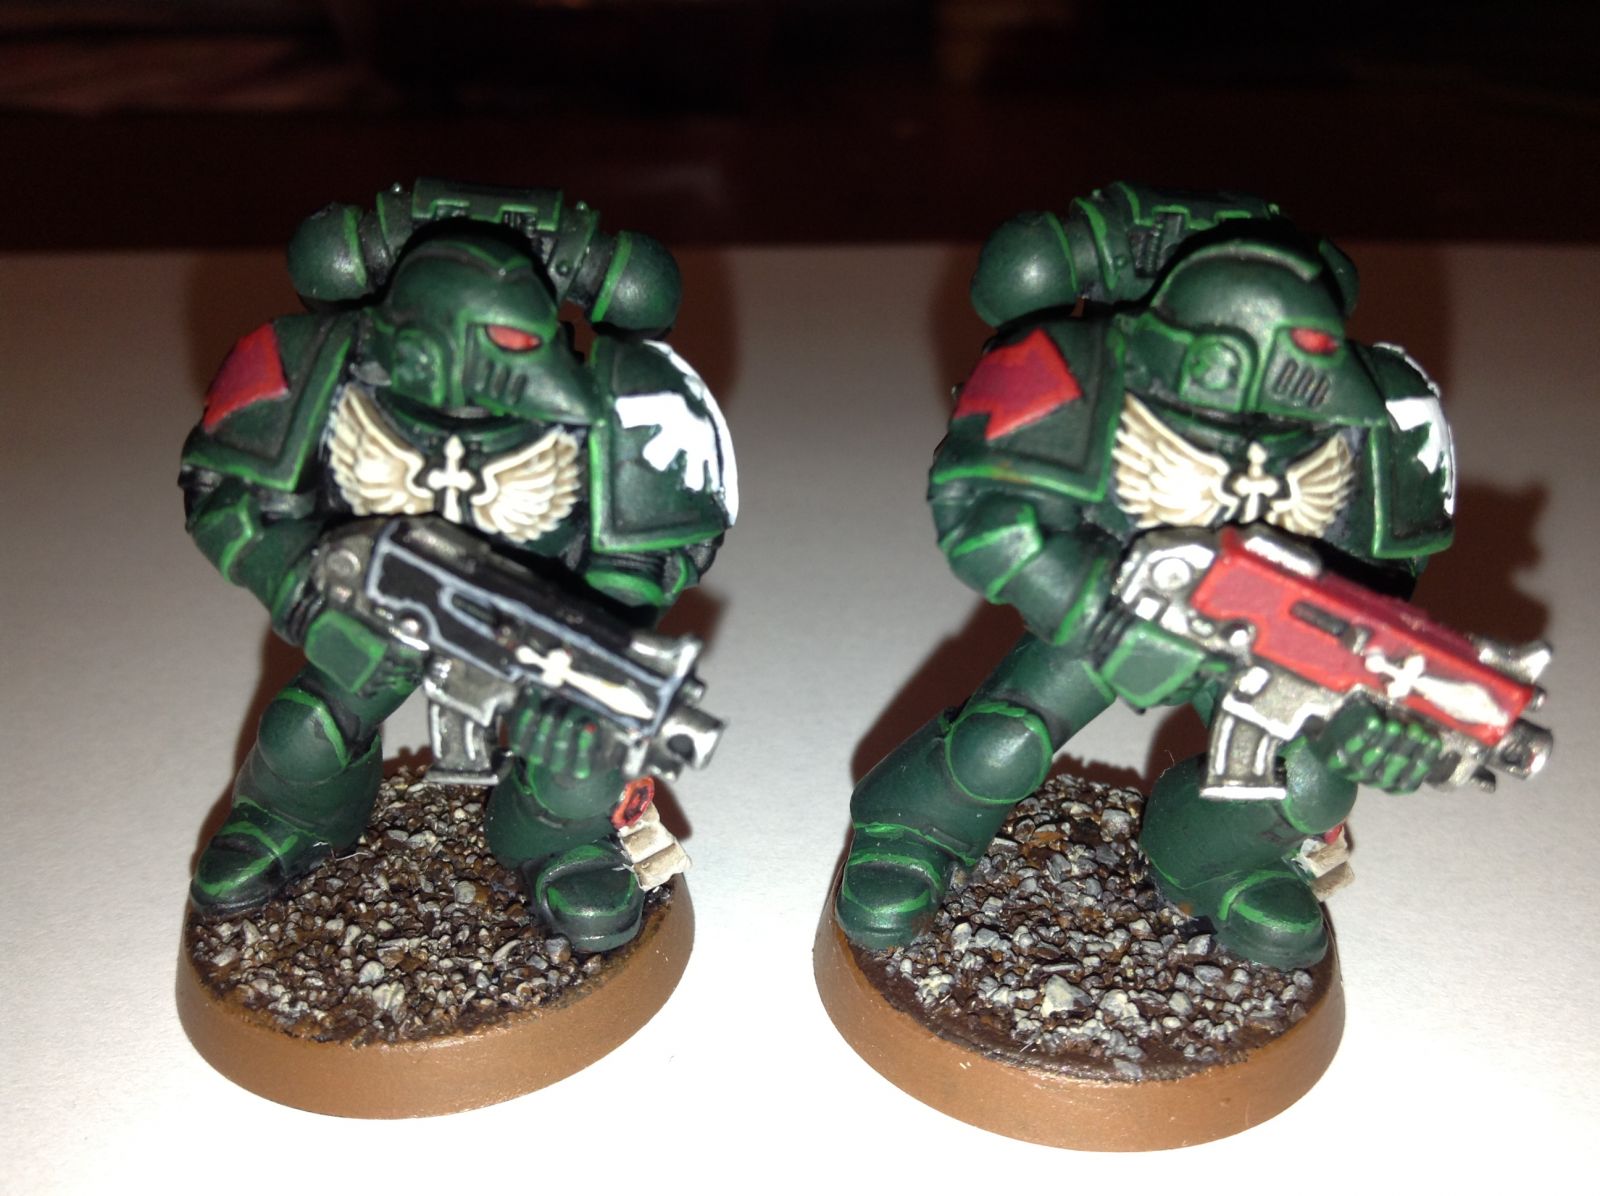 Bolter case comparison - Dark Angels & Successors - The Bolter and ...